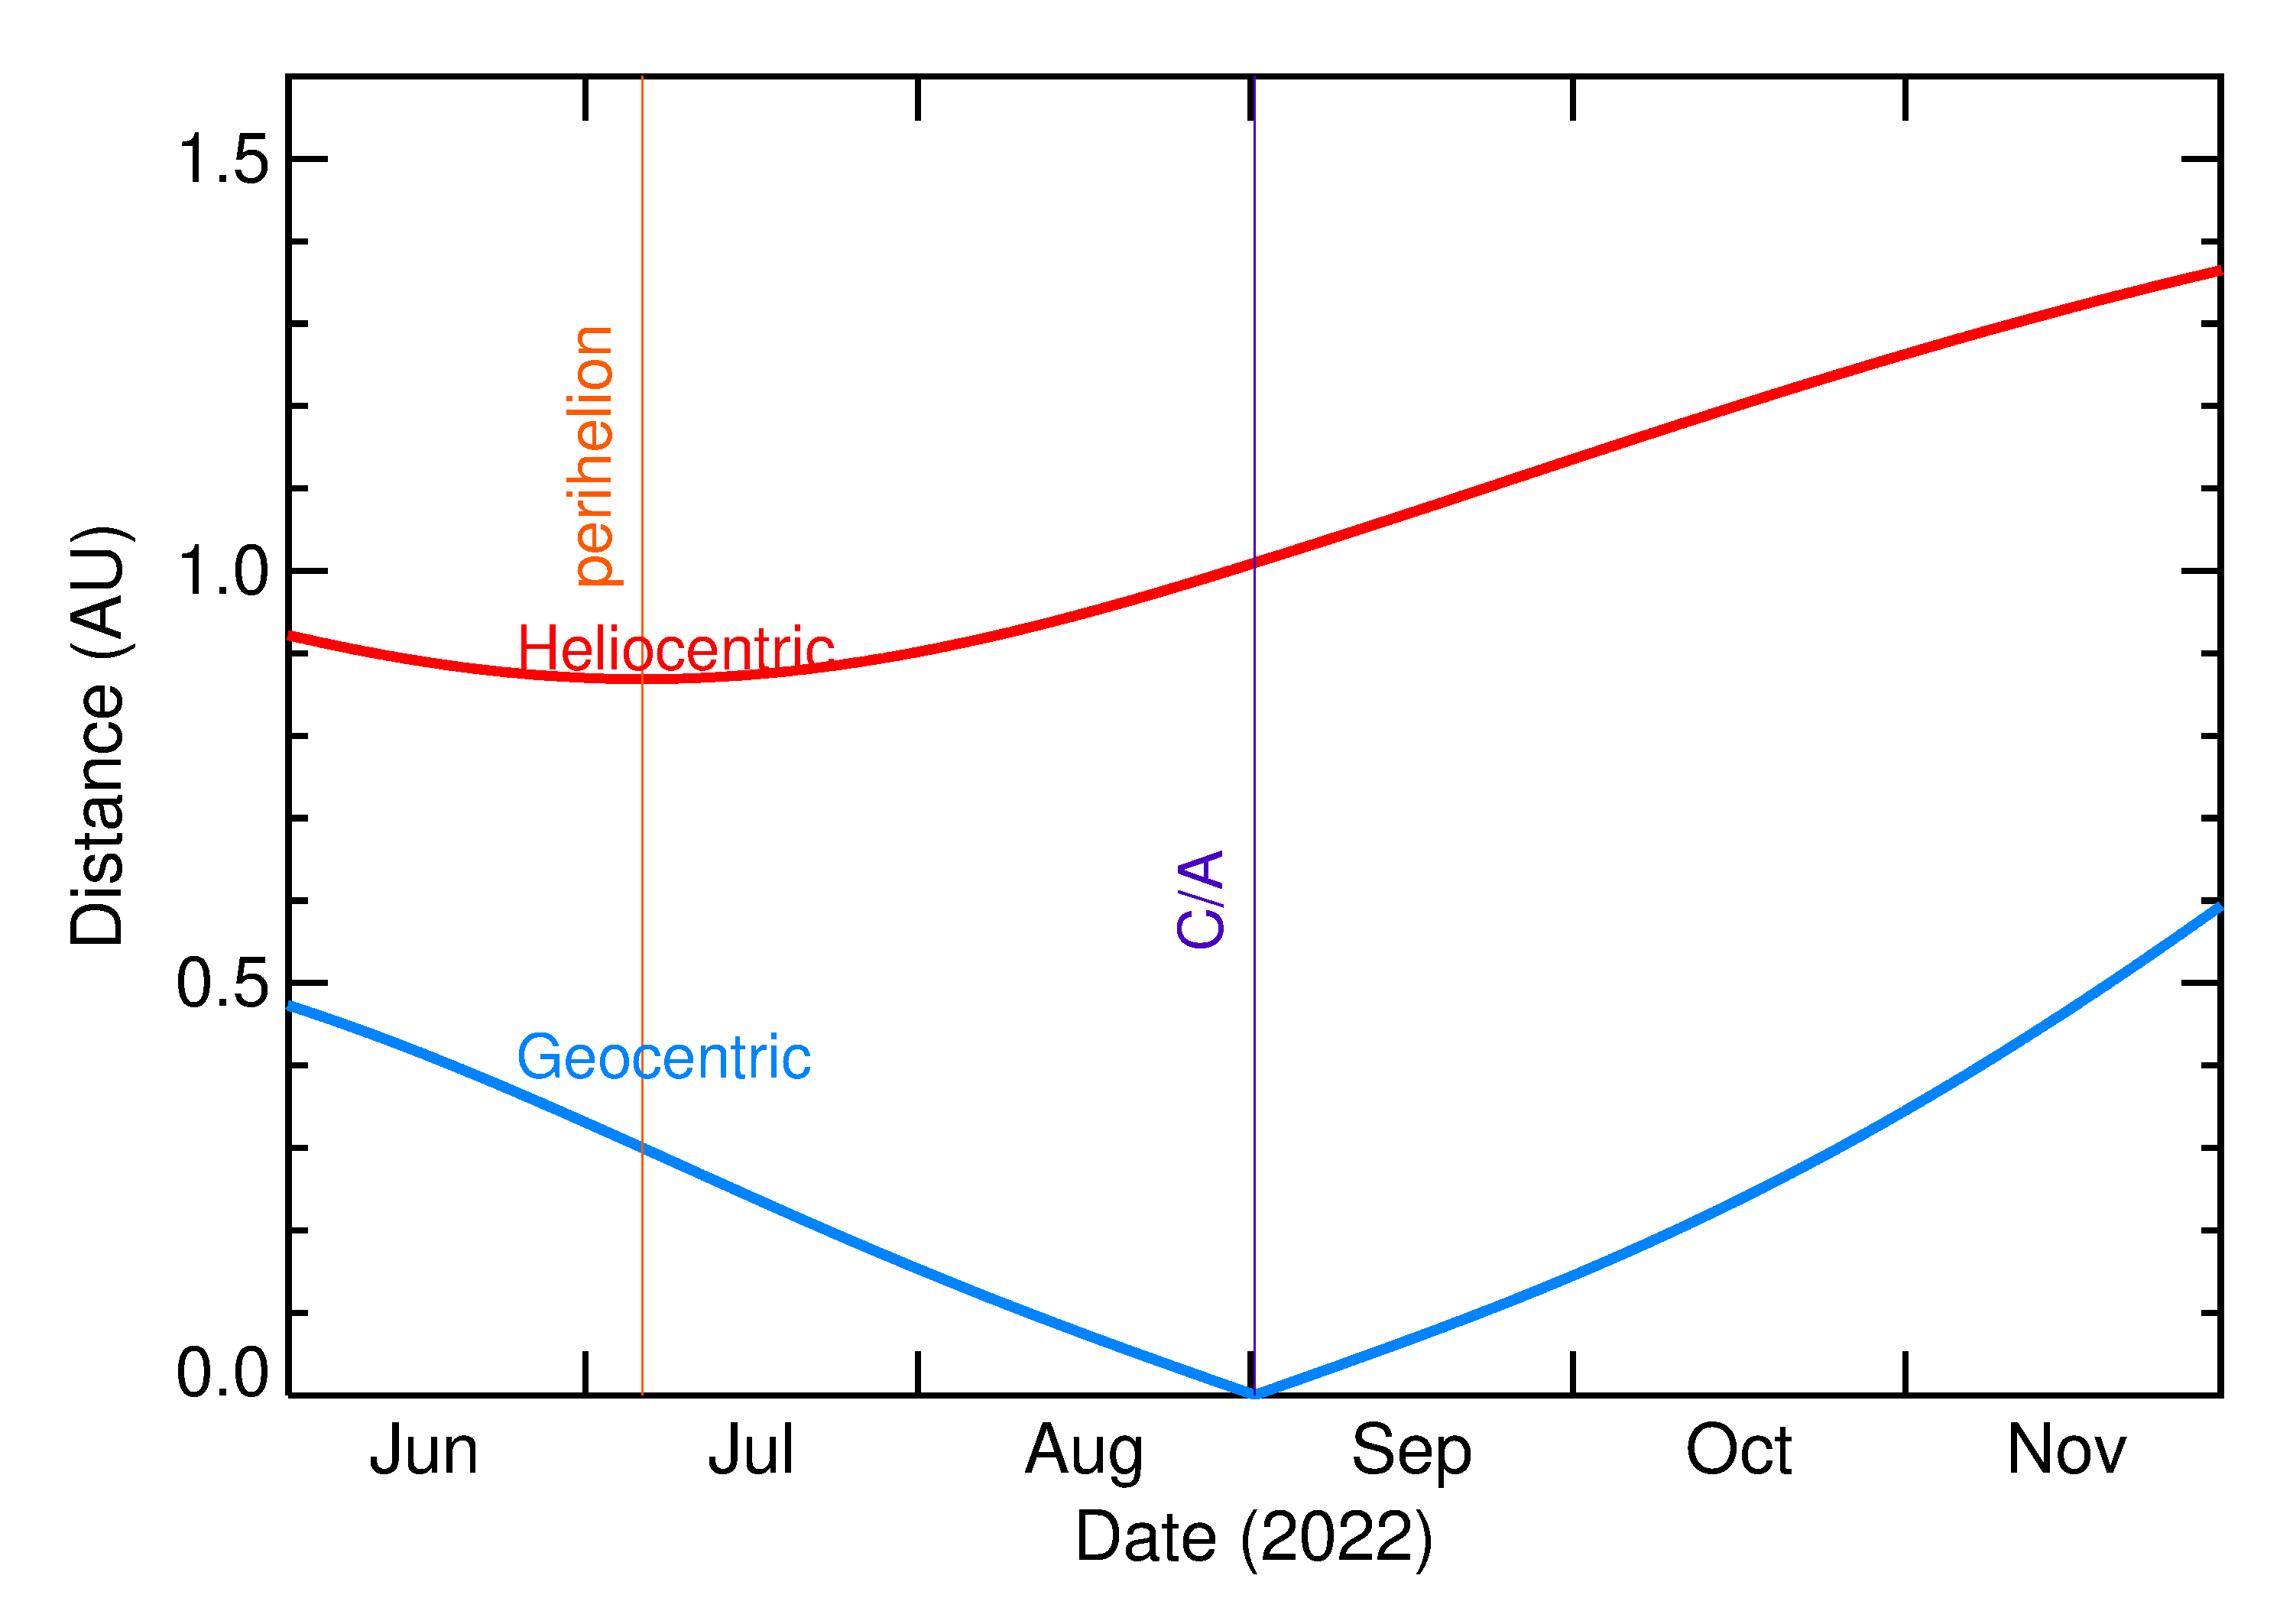 Heliocentric and Geocentric Distances of 2022 RL in the months around closest approach